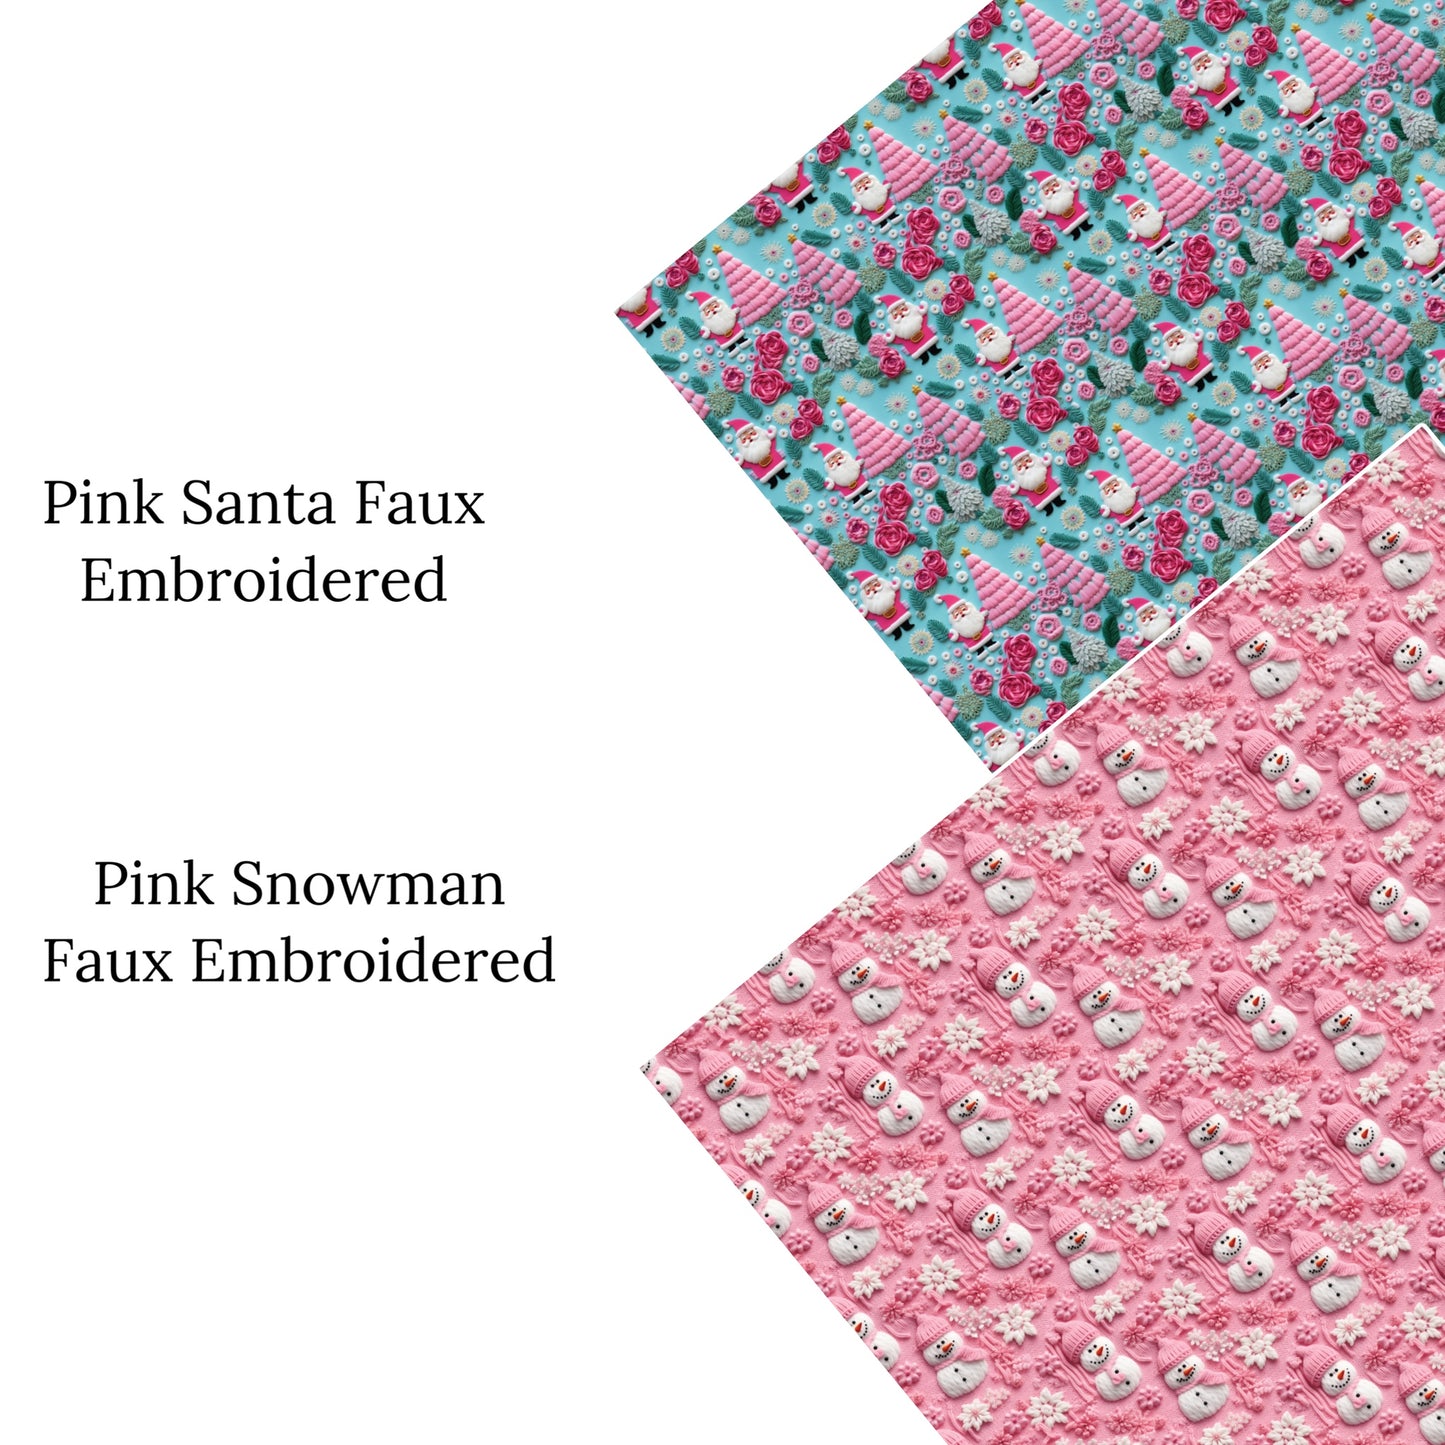 Pink Snowman Faux Embroidered Faux Leather Sheets